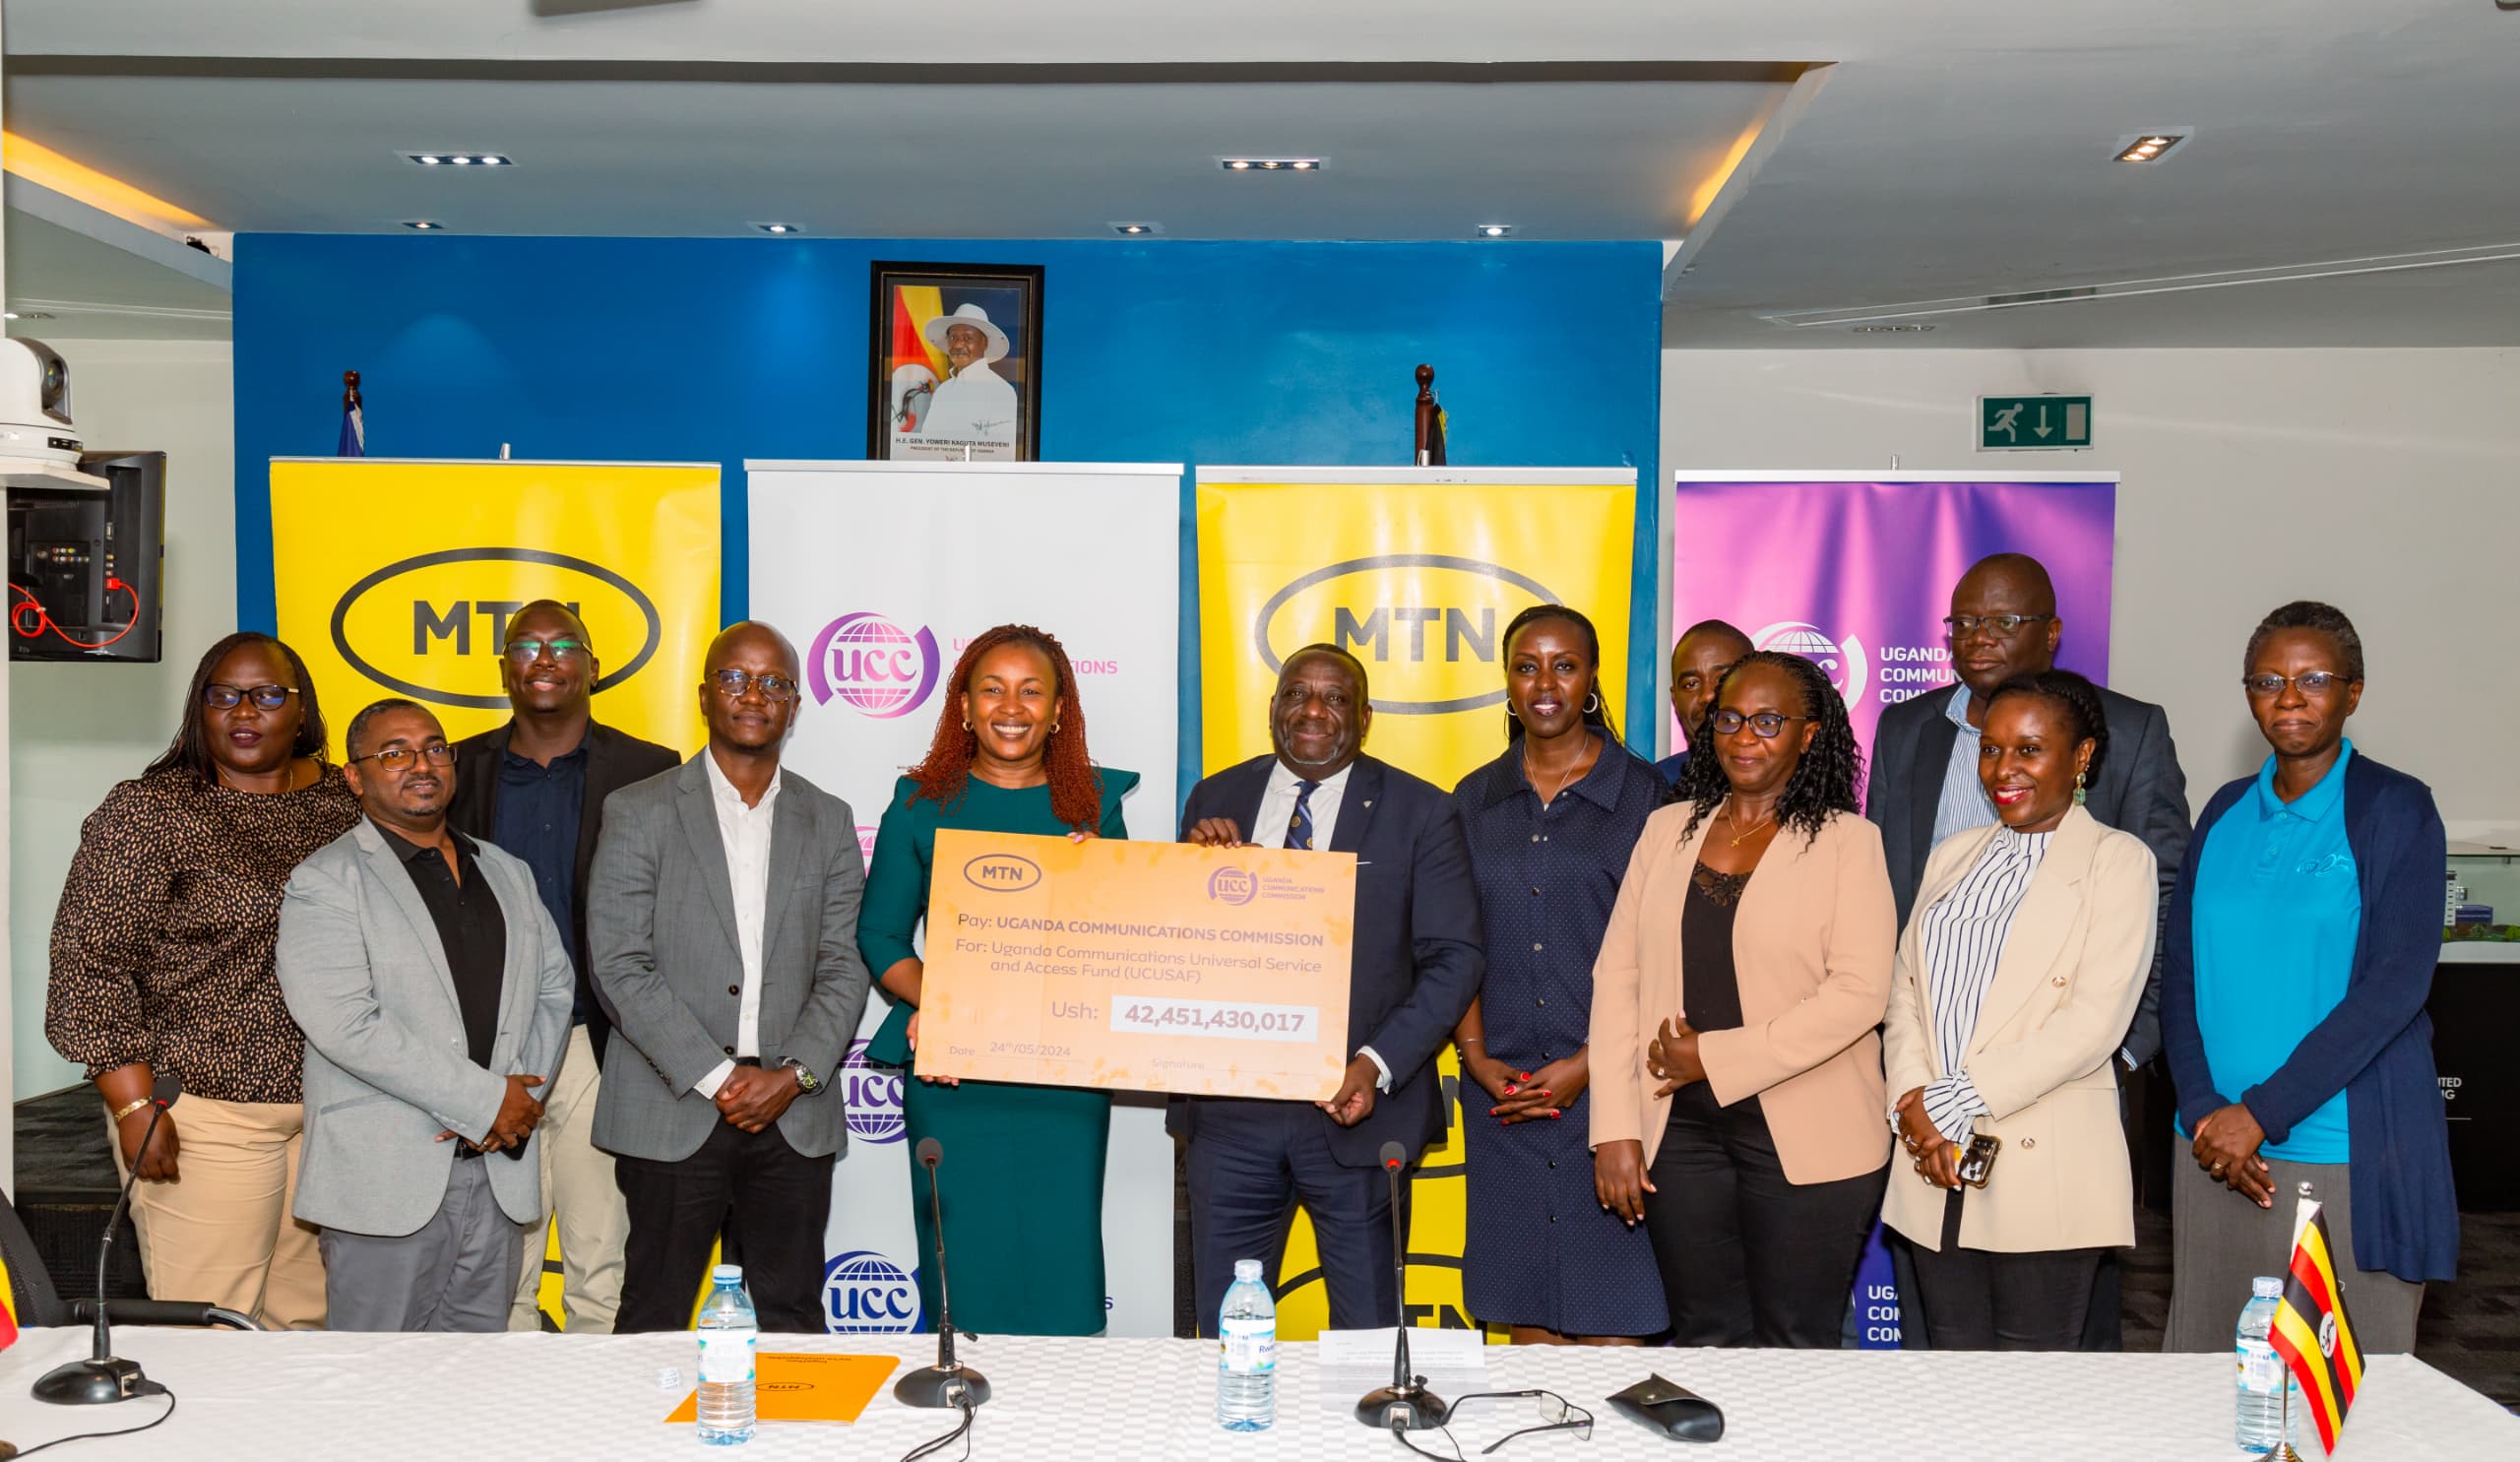 MTN Uganda CEO Ms. Sylvia Mulinge (5th from left) hands over a dummy cheque of UGX42.5 billion to UCC's Executive Director Thembo Nyombi. The contribution will goes towards developing telecommunications services in underserved areas.